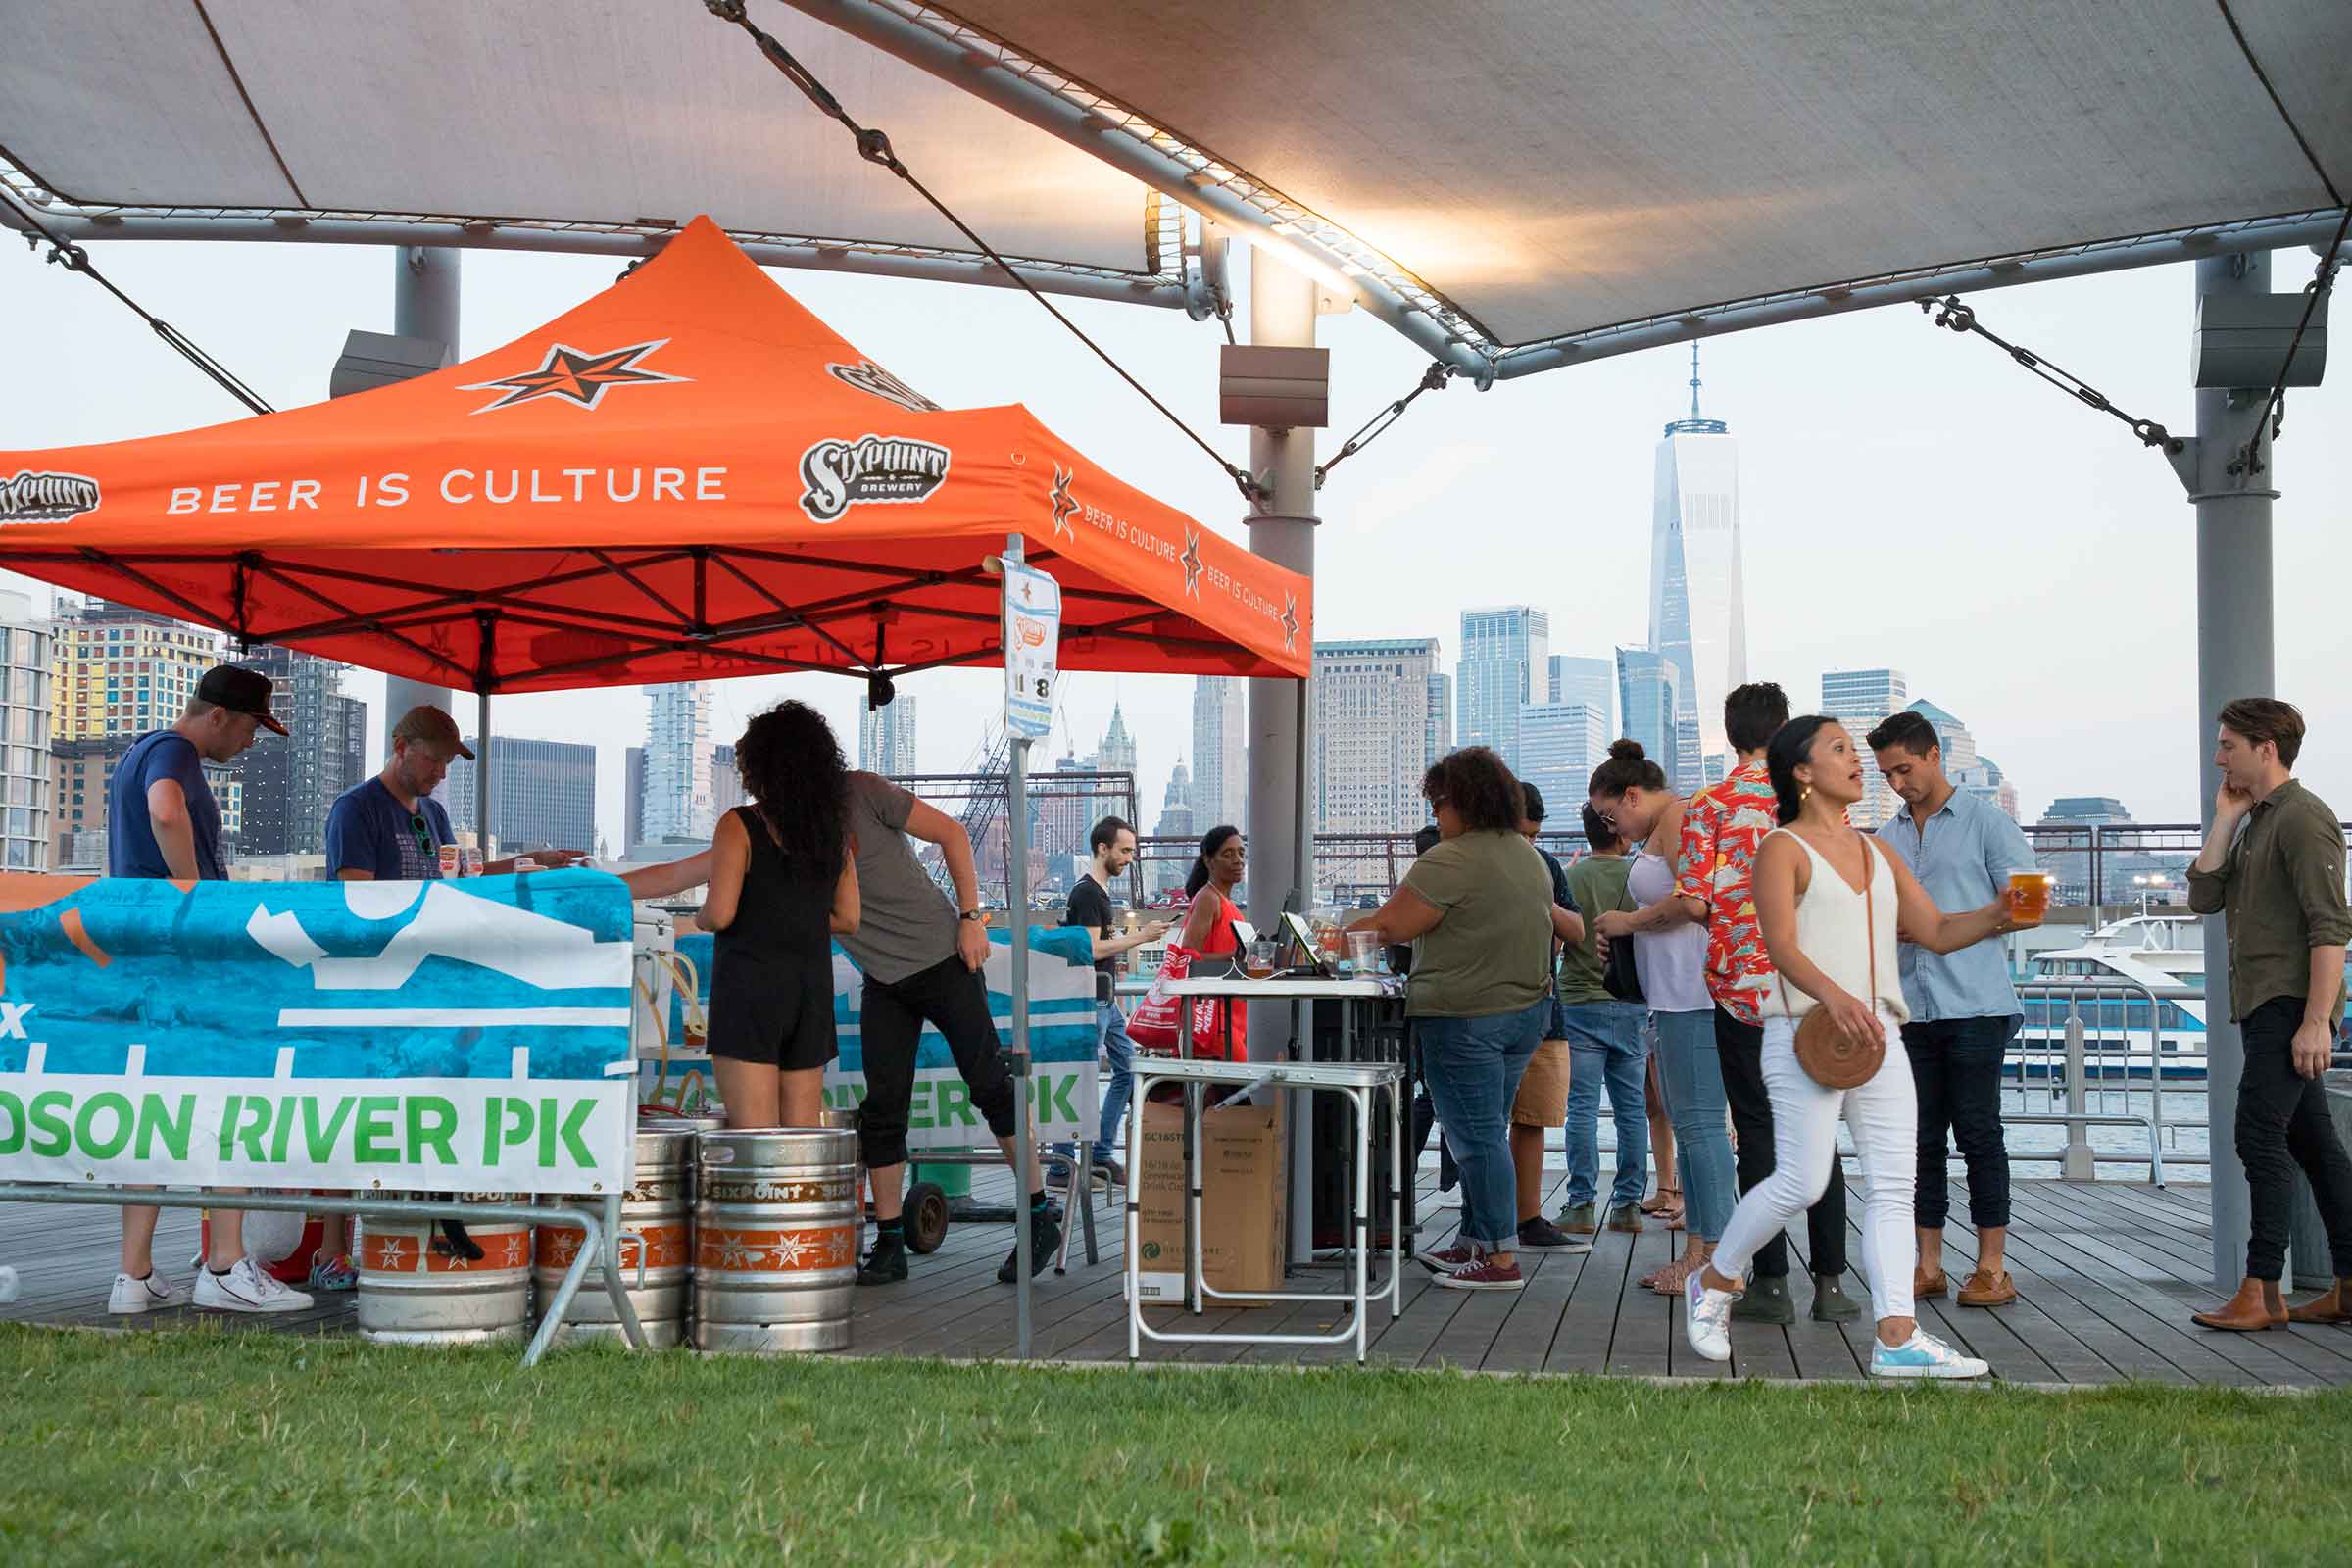 Sixpoint provides beer and other beverages as a sponsor for Hudson River Park